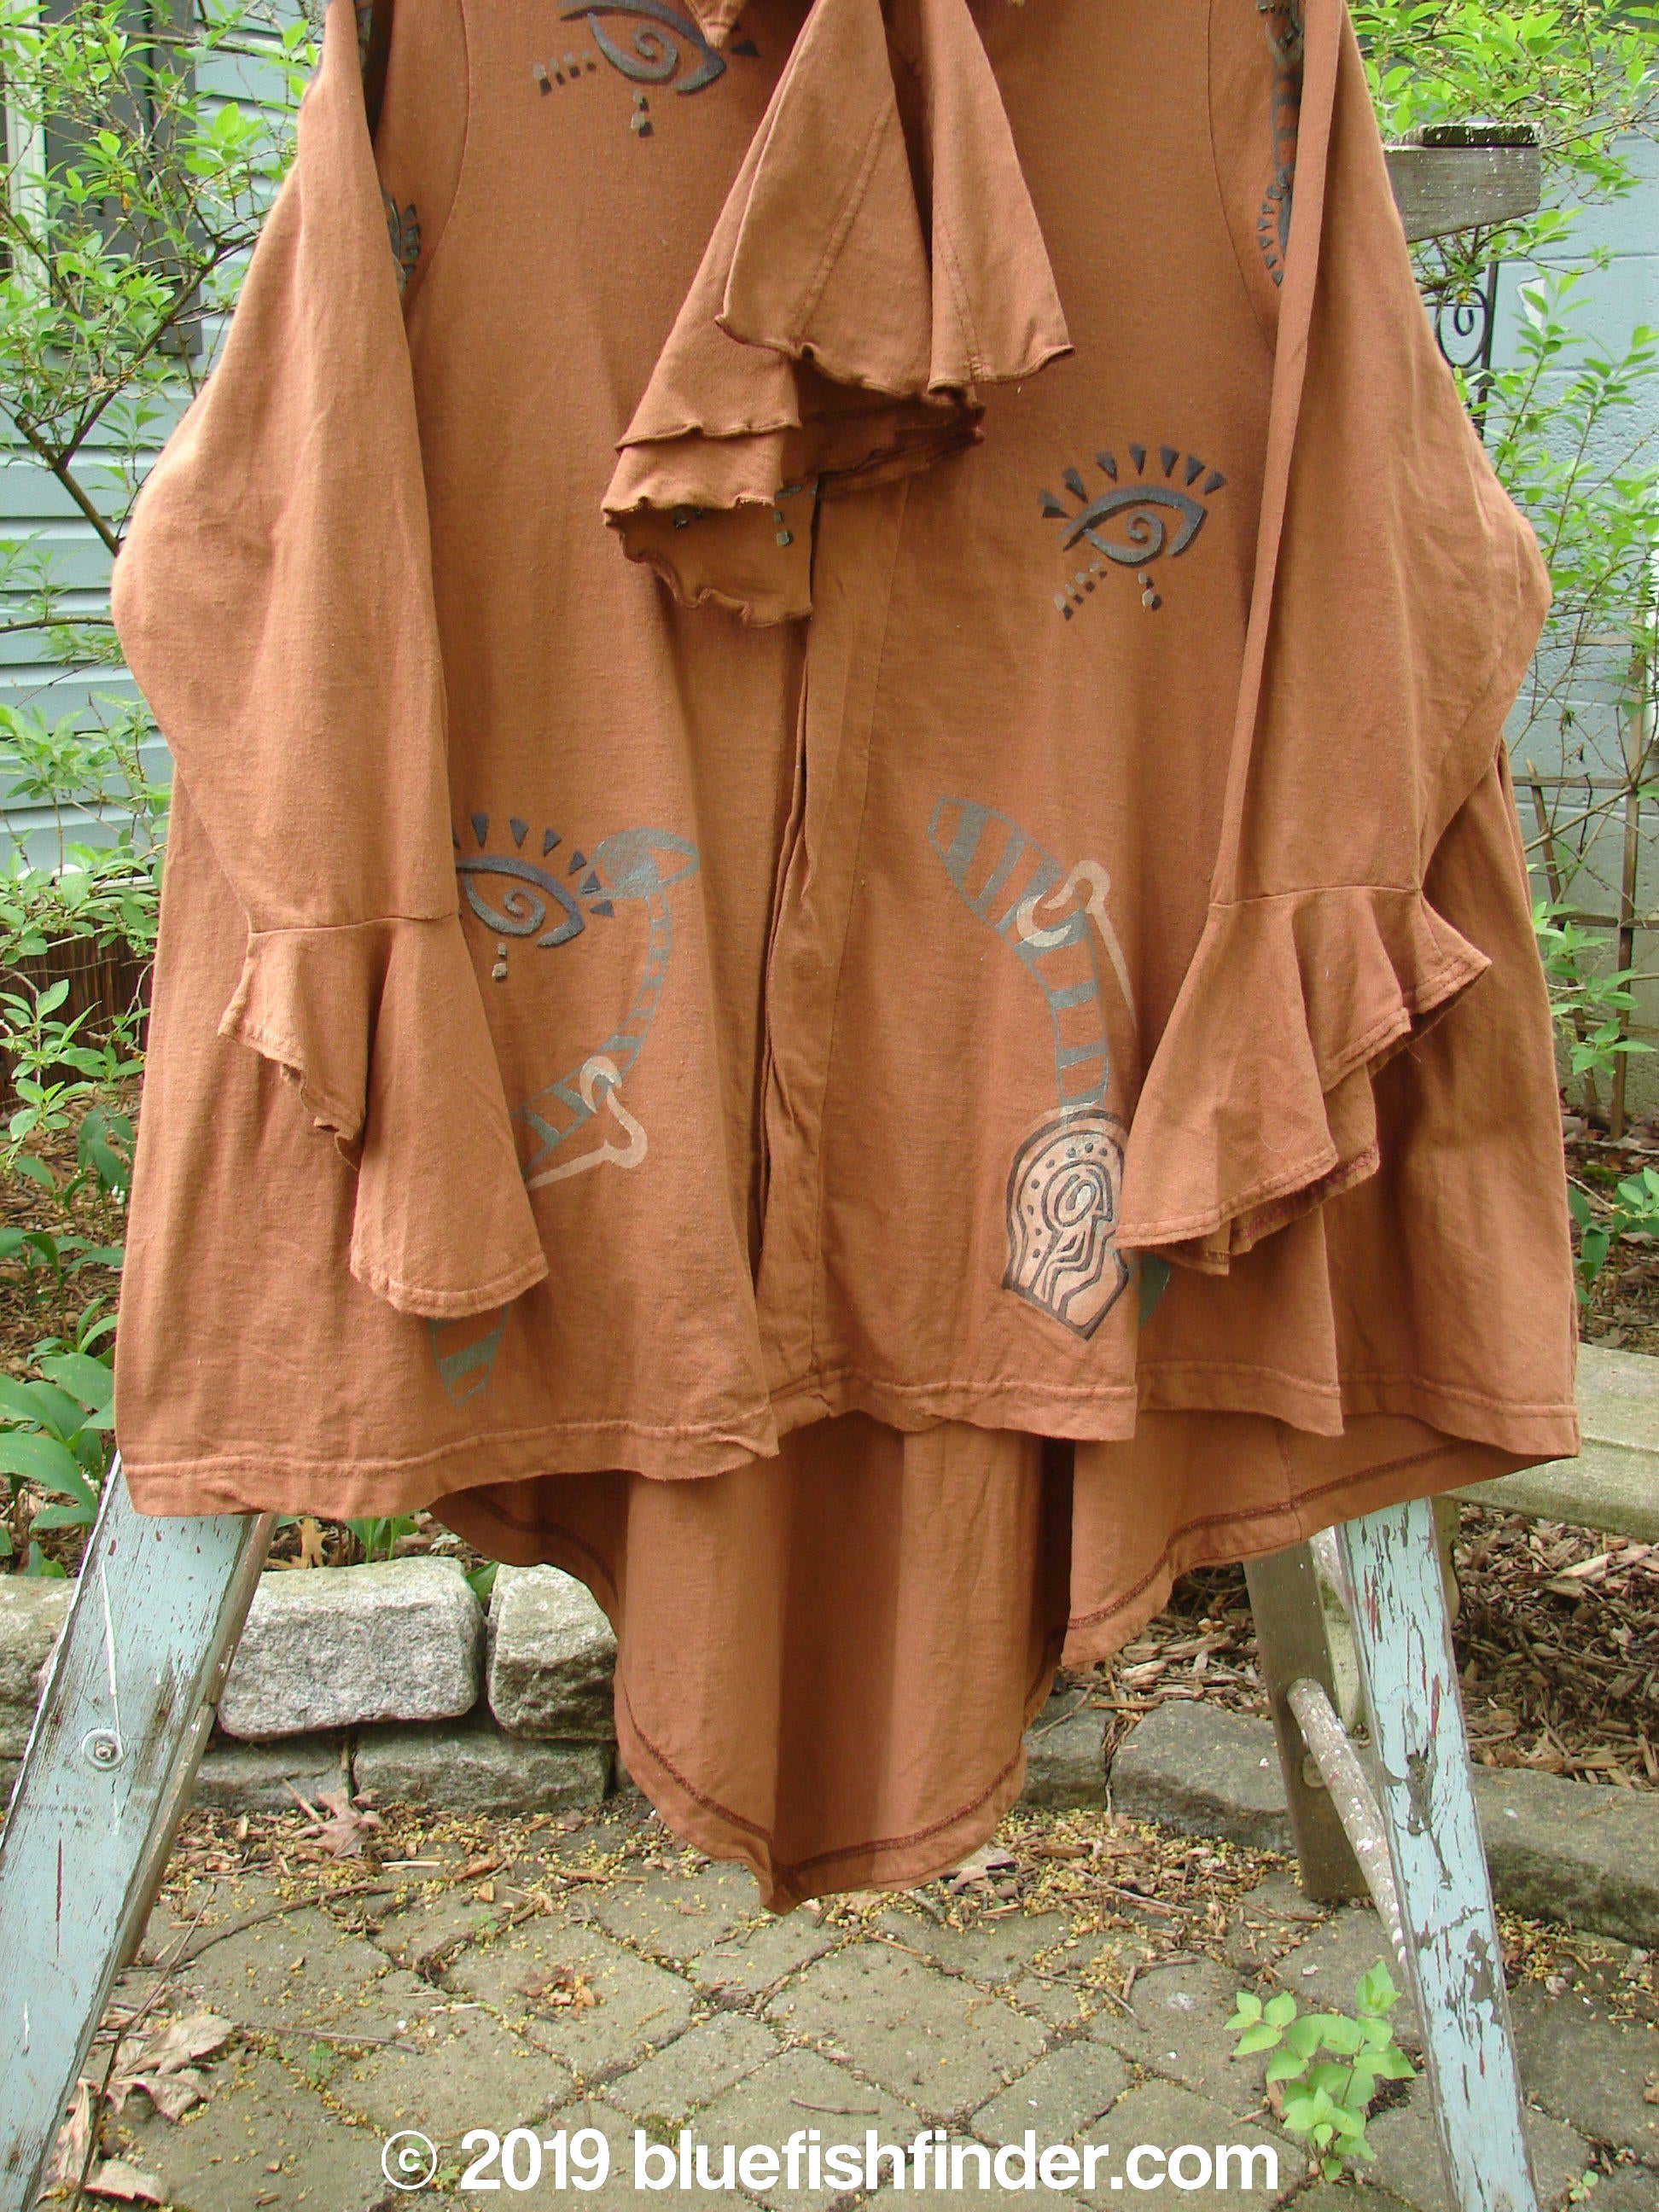 1996 Flutter Jacket Abstract Cassia Size 2: A brown shirt with a unique design. Hidden button front with a painted cloth covered button. Triangular removable flounce on front and back. Dramatic ruffled rear hemline. Flutter sleeves. Wild abstract theme paint. Generous hip measurements.